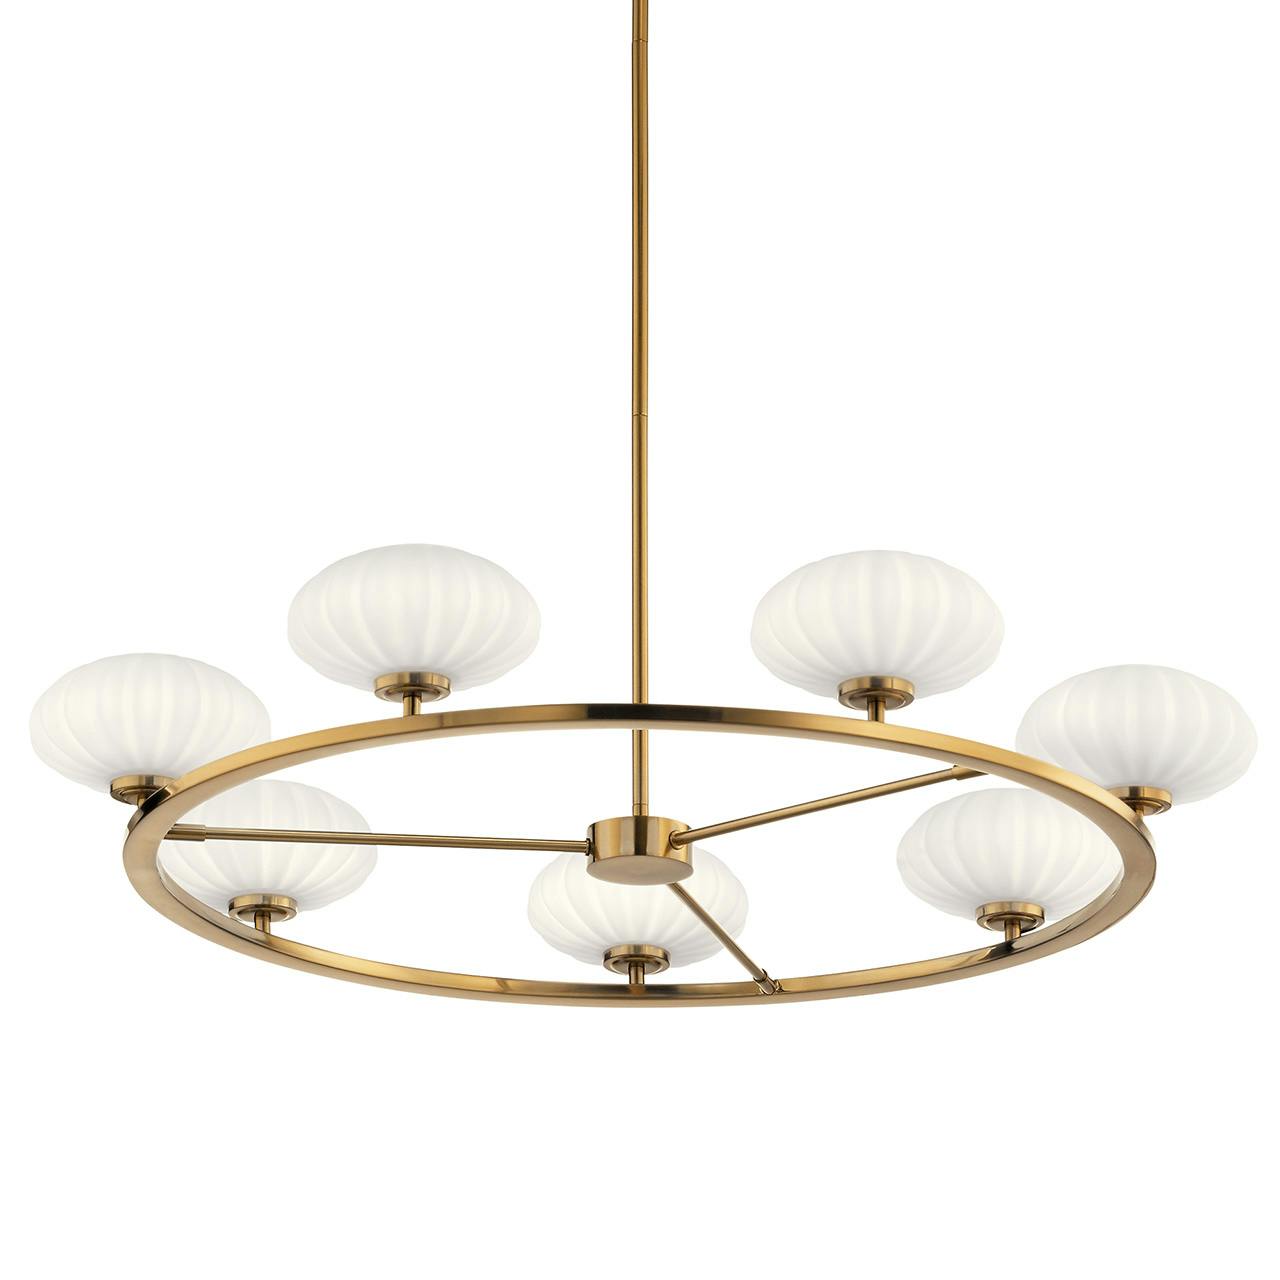 Pim 40" 7 Light Round Chandelier in Gold without the canopy on a white background